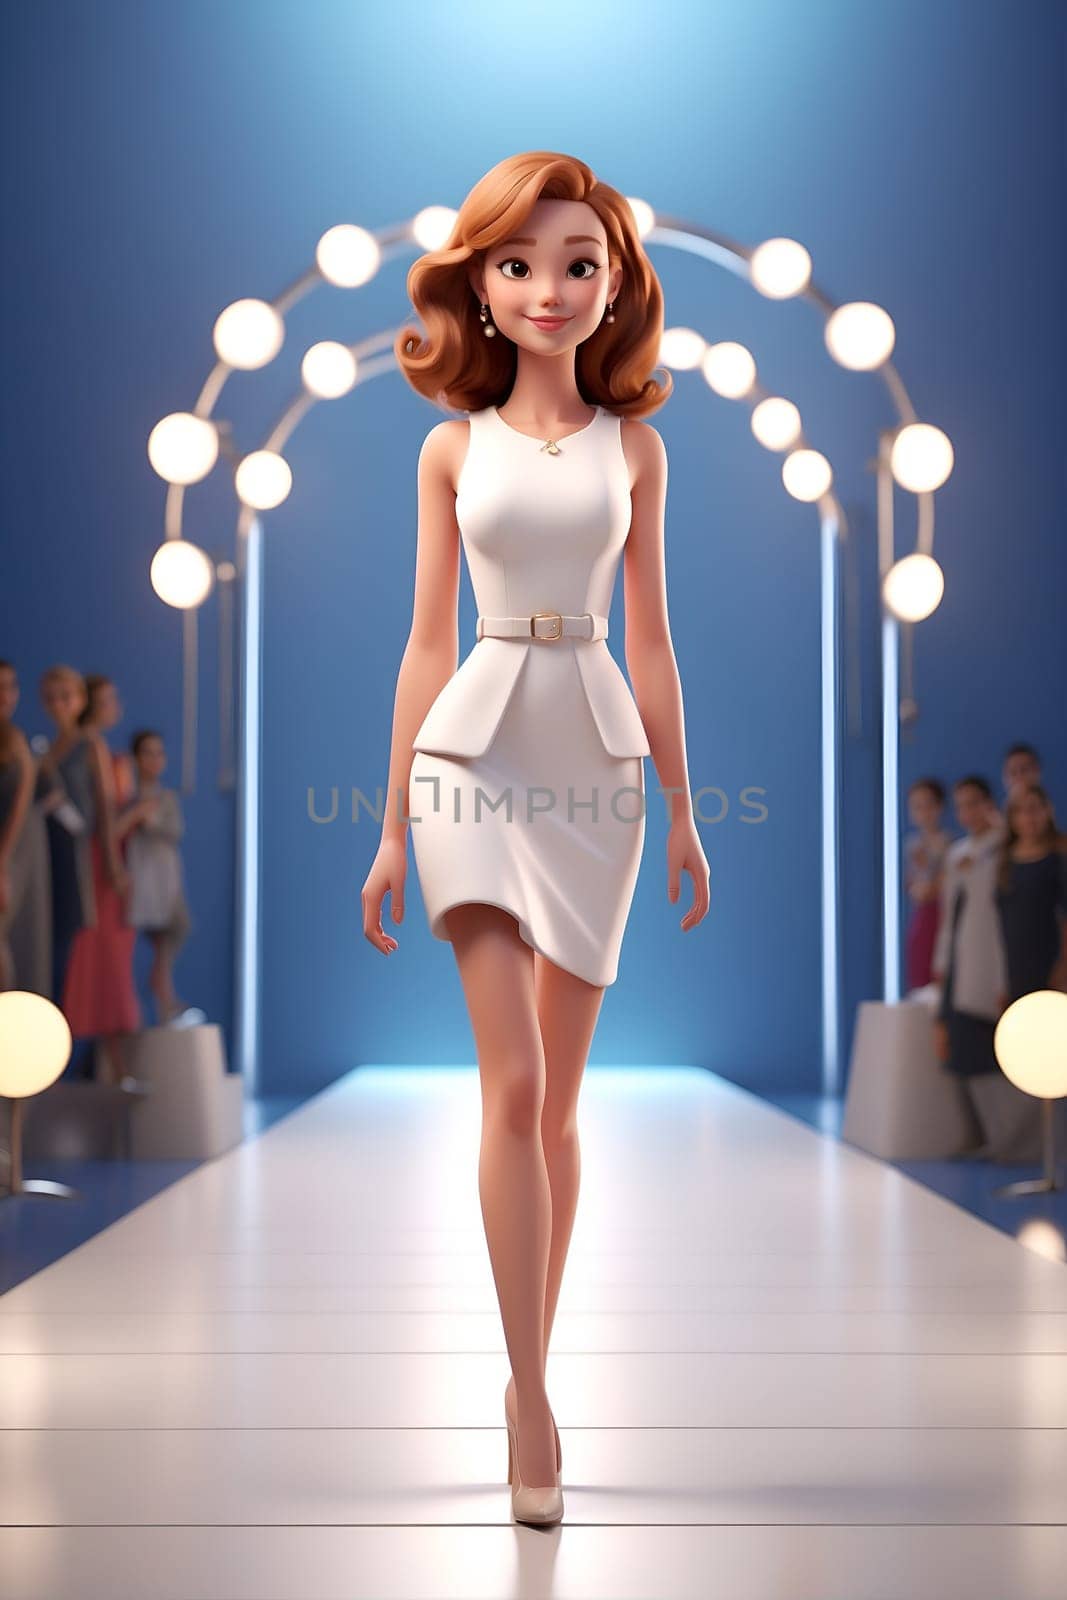 A stunning woman confidently walks down the runway in a white dress.